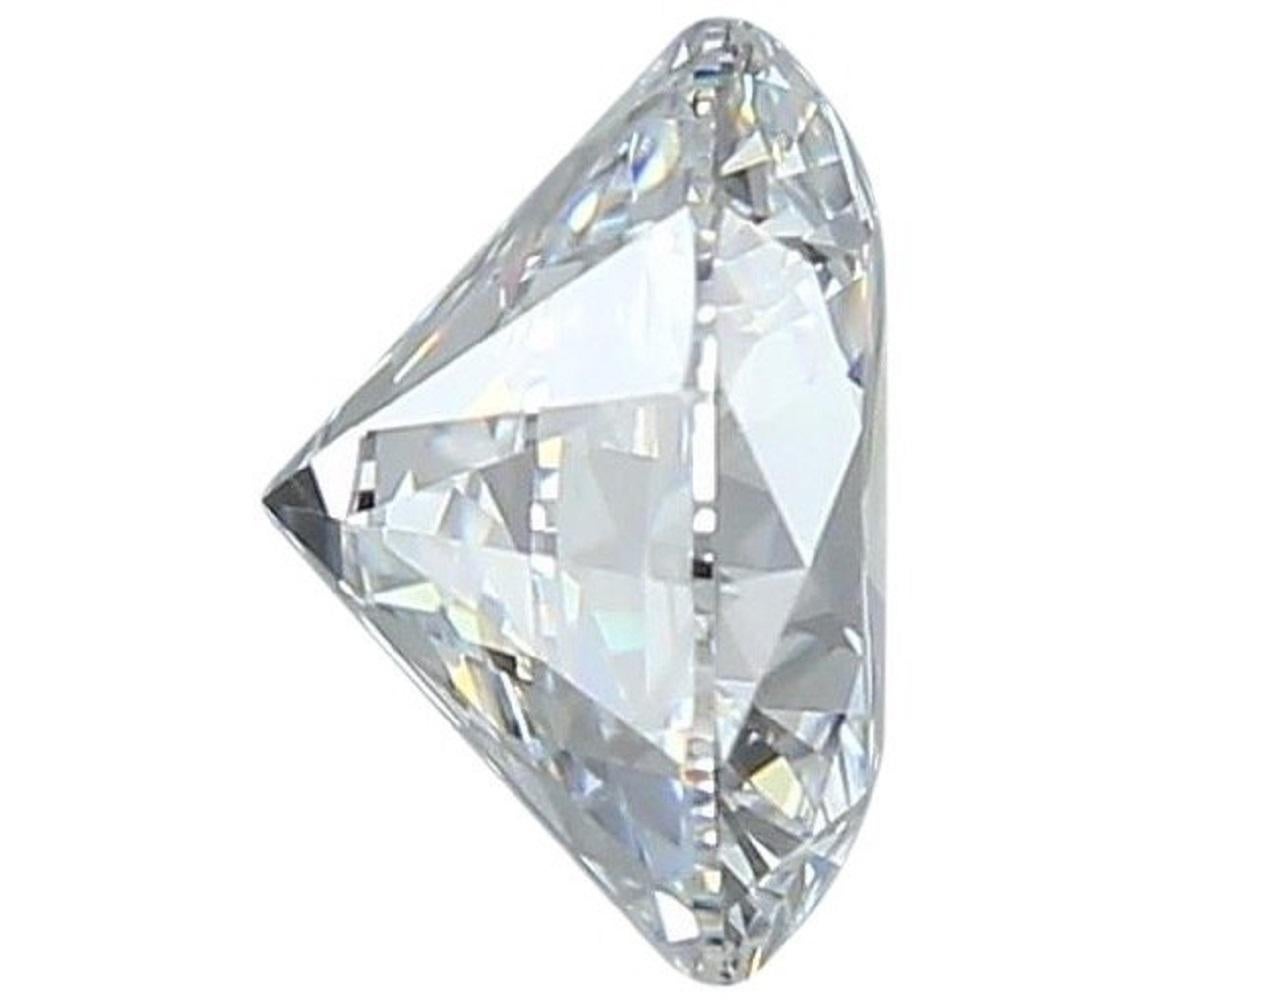 1 sparkling flawless natural round brilliant diamond in a 0.52 carat D IF with triple excellent cut. It has the highest possible color and clarity grading. This diamond comes with IGI Certificate and laser inscription number.

SKU: E-242
IGI